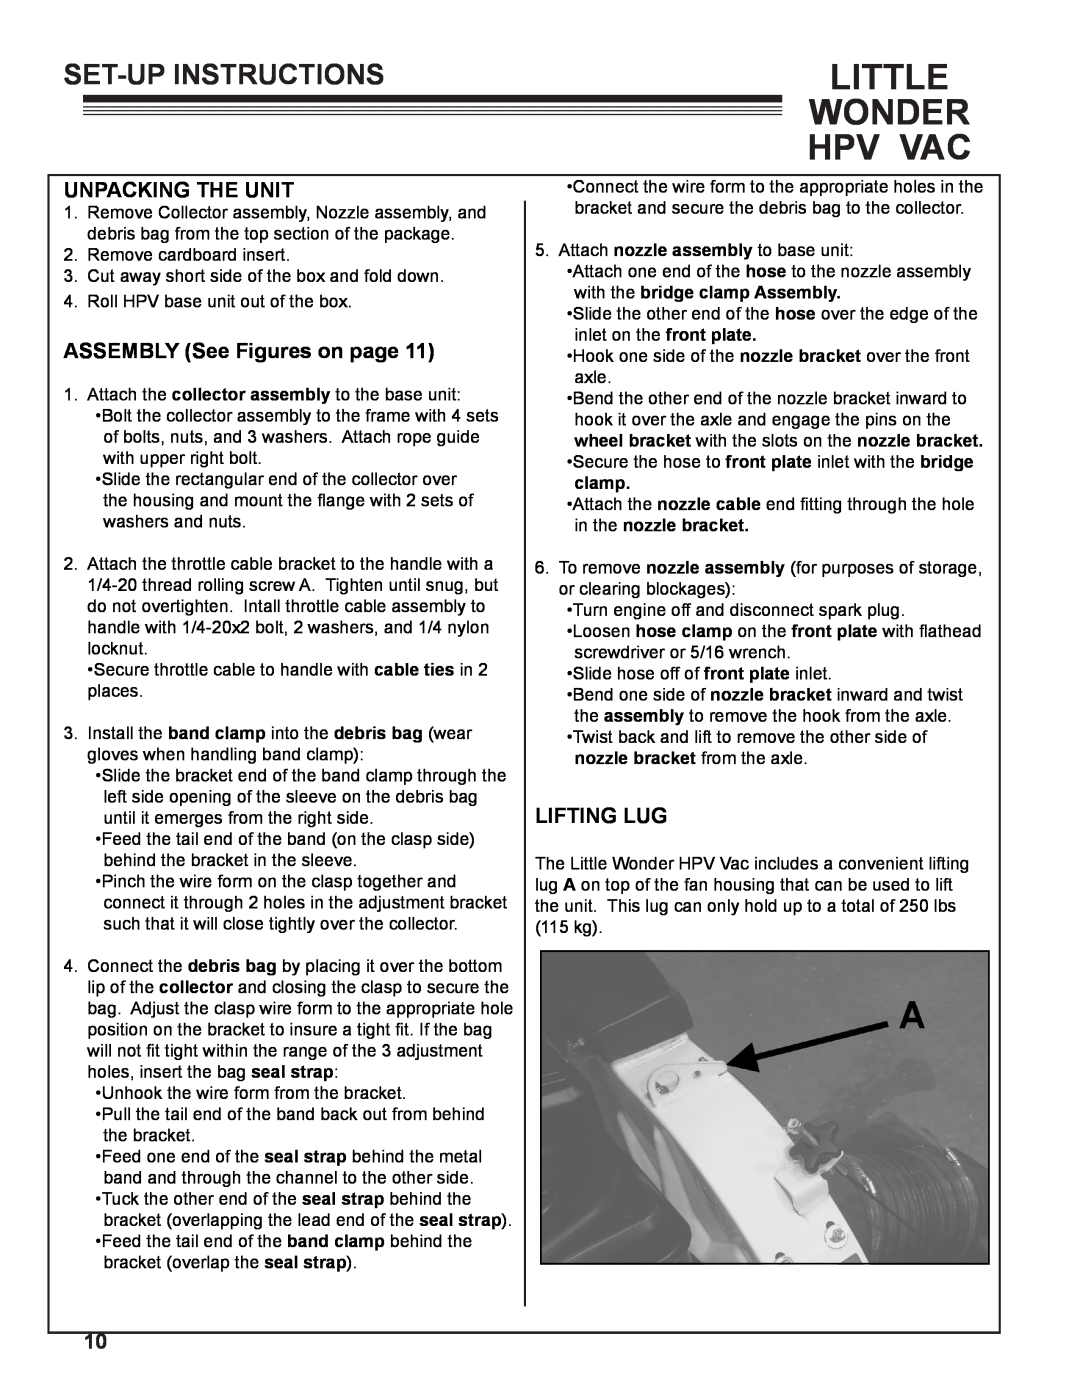 Little Wonder 5612-00-01 manual Set-Upinstructions, Unpacking The Unit, ASSEMBLY See Figures on page, Lifting Lug 